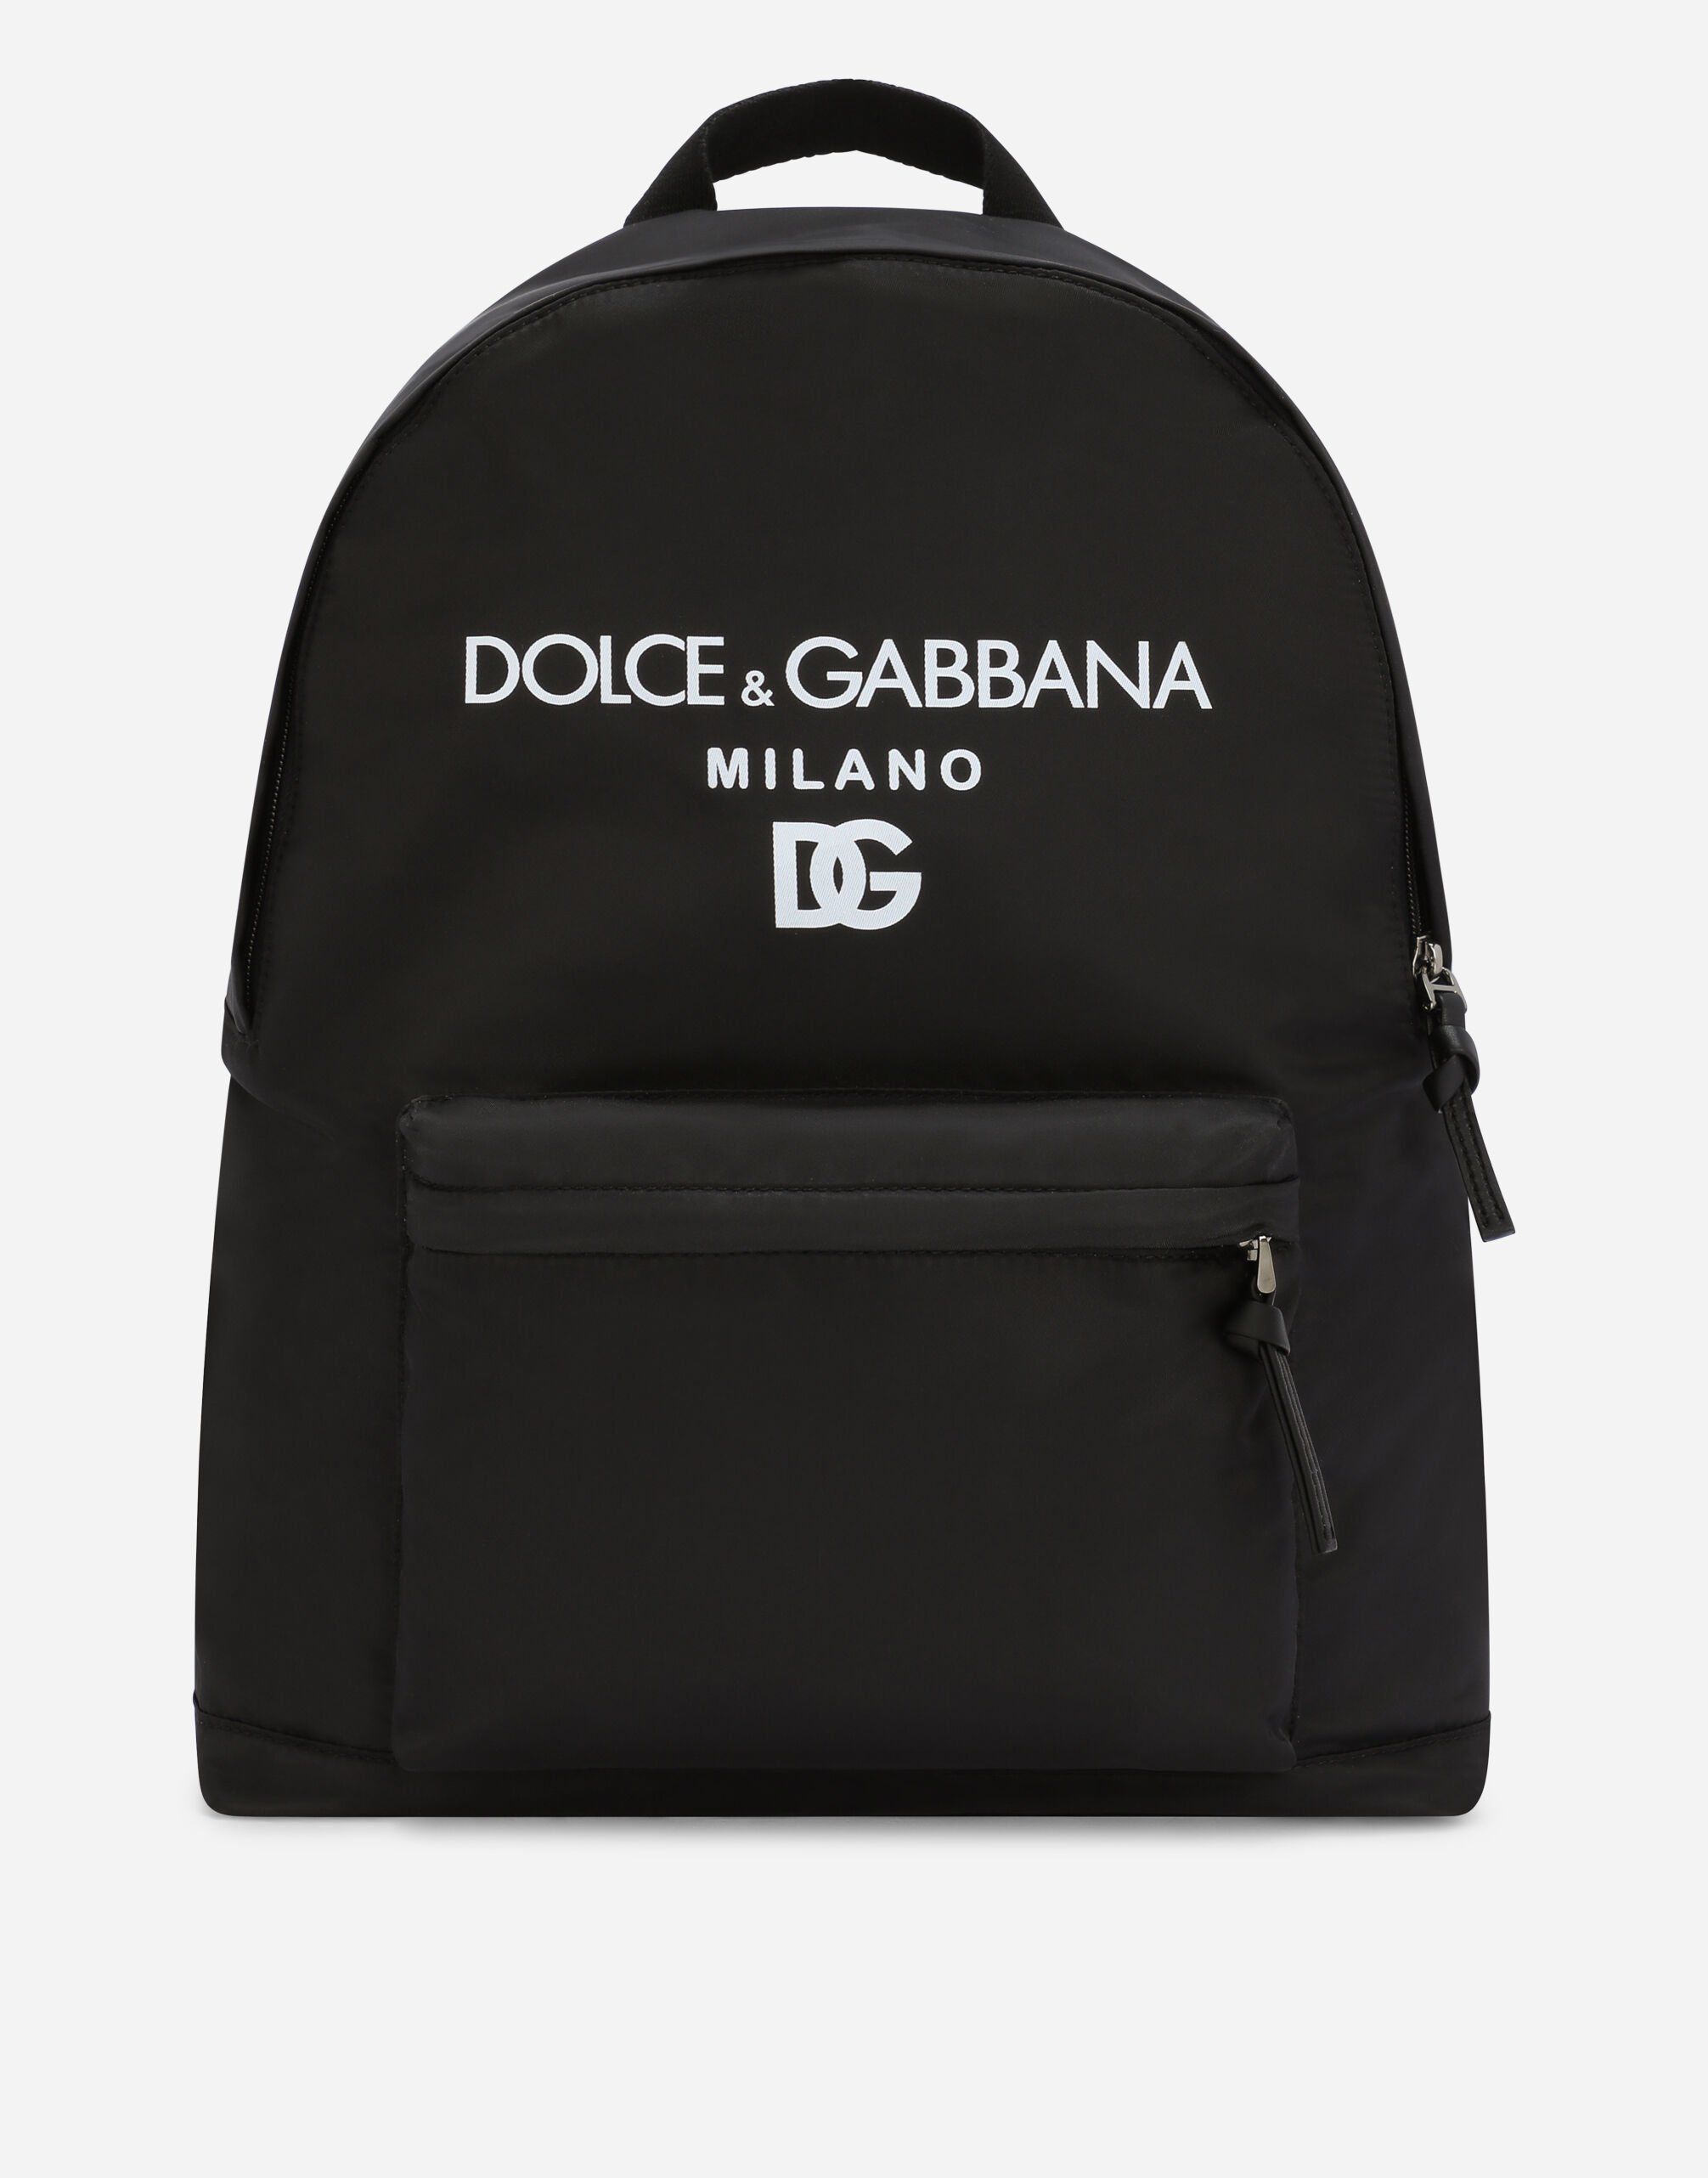 Nylon backpack with Dolce&Gabbana Milano print in Black for